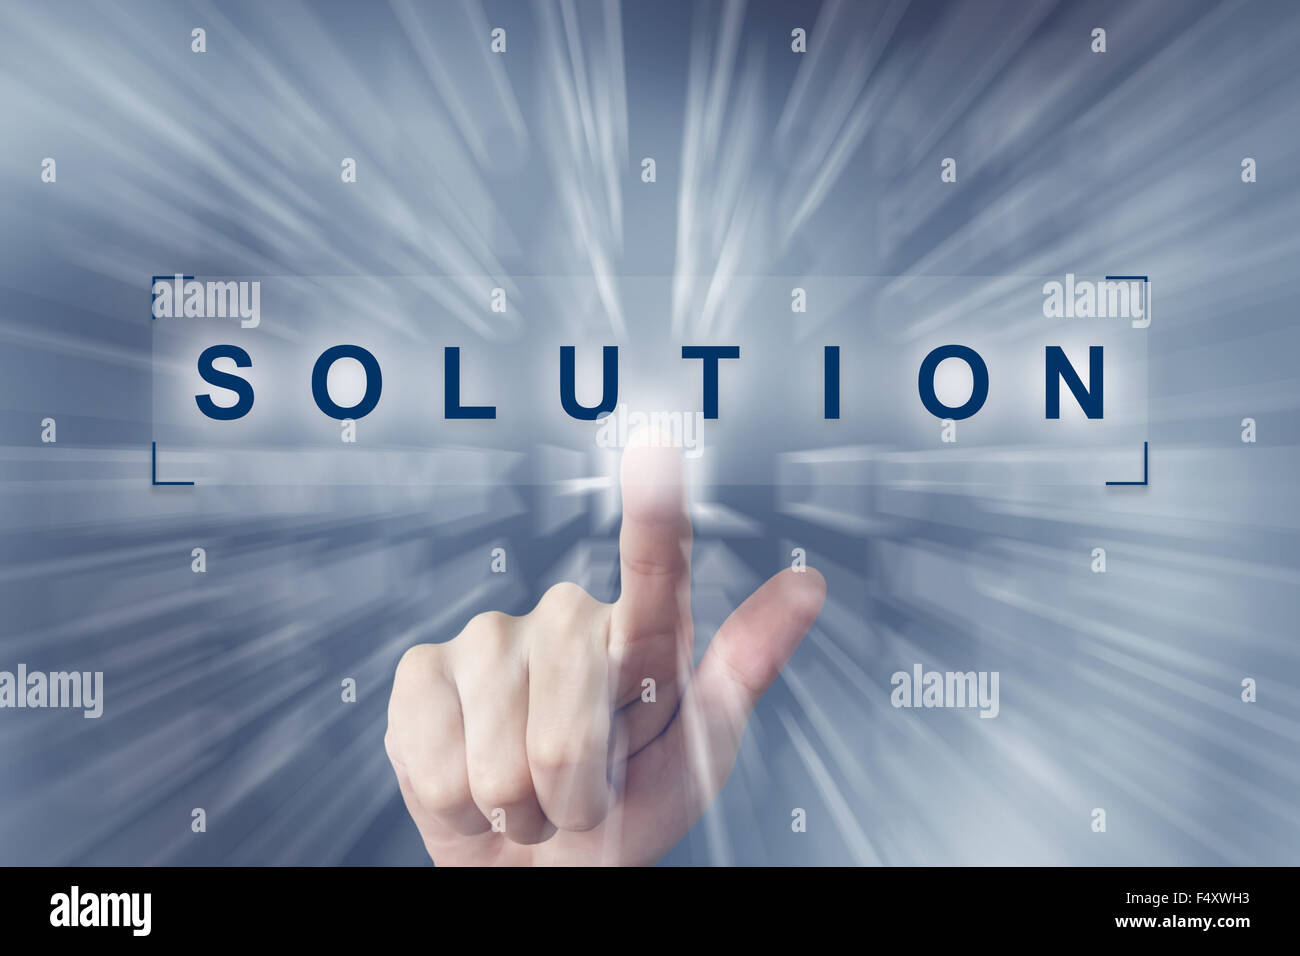 hand clicking on solution button with zoom effect background Stock Photo